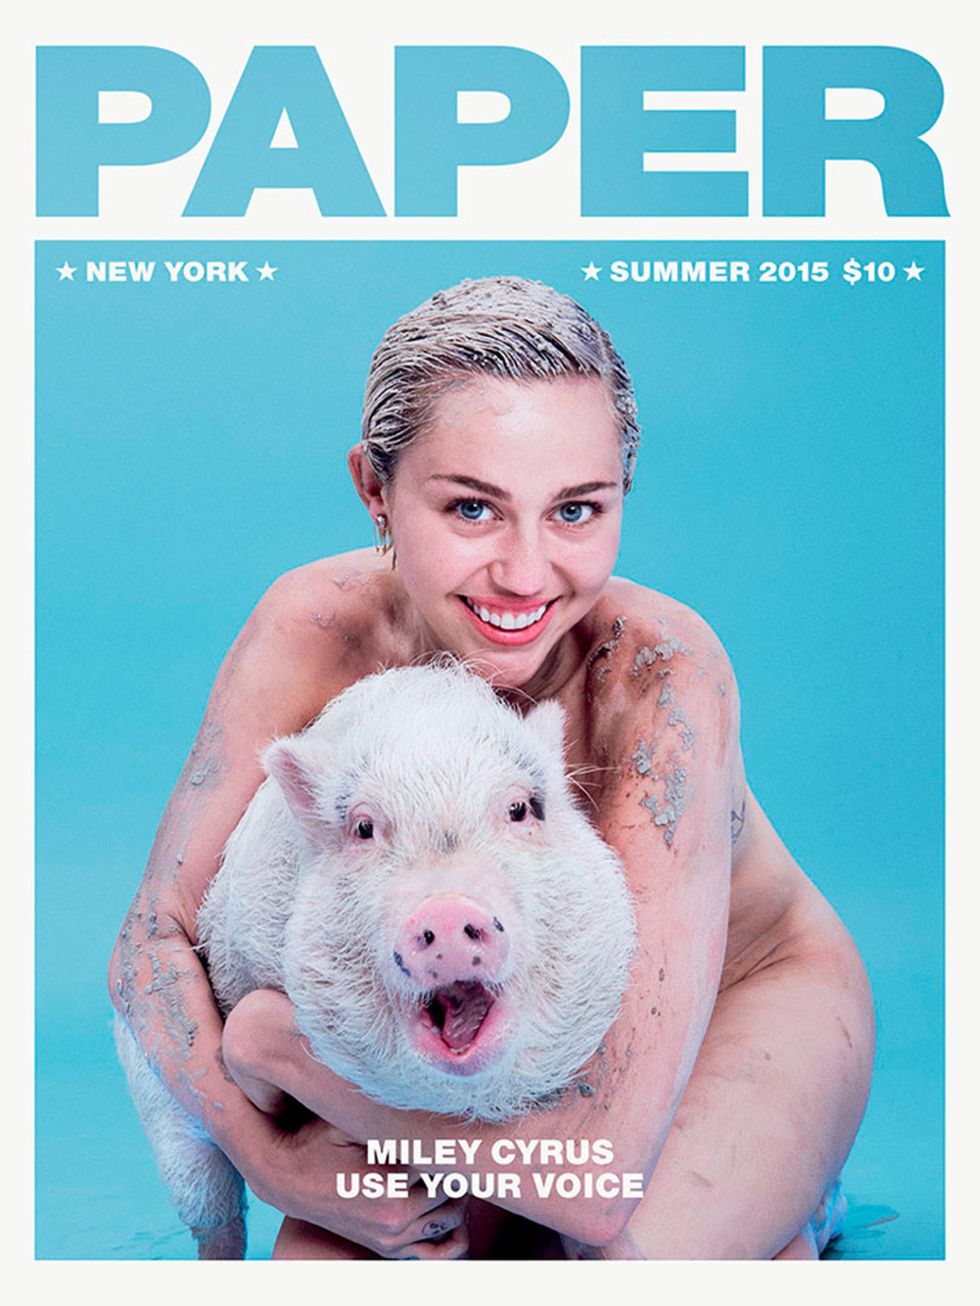 <p><strong>A pig</strong></p>

<p>Not just any pig, of course - this is Miley's pet pig, Bubba Sue, protecting Miley's modesty on the cover of Paper Magazine. #Breaktheinternet indeed.</p>